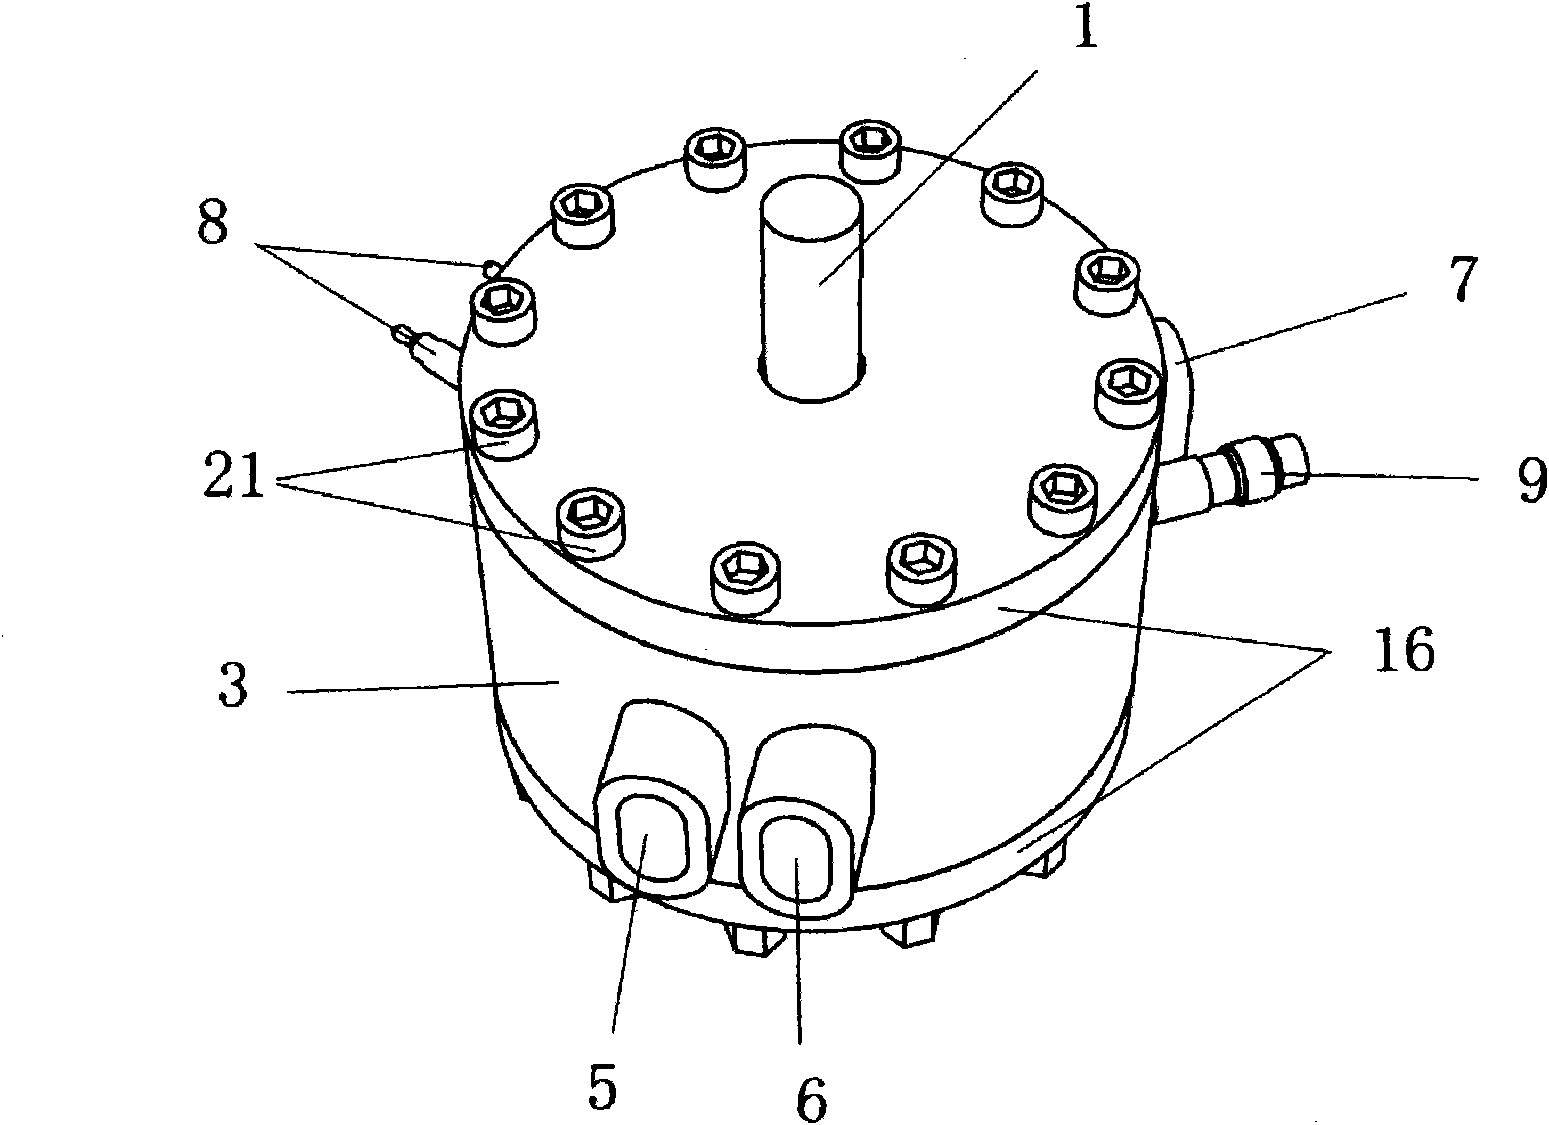 Hybrid-power engine with square rotor